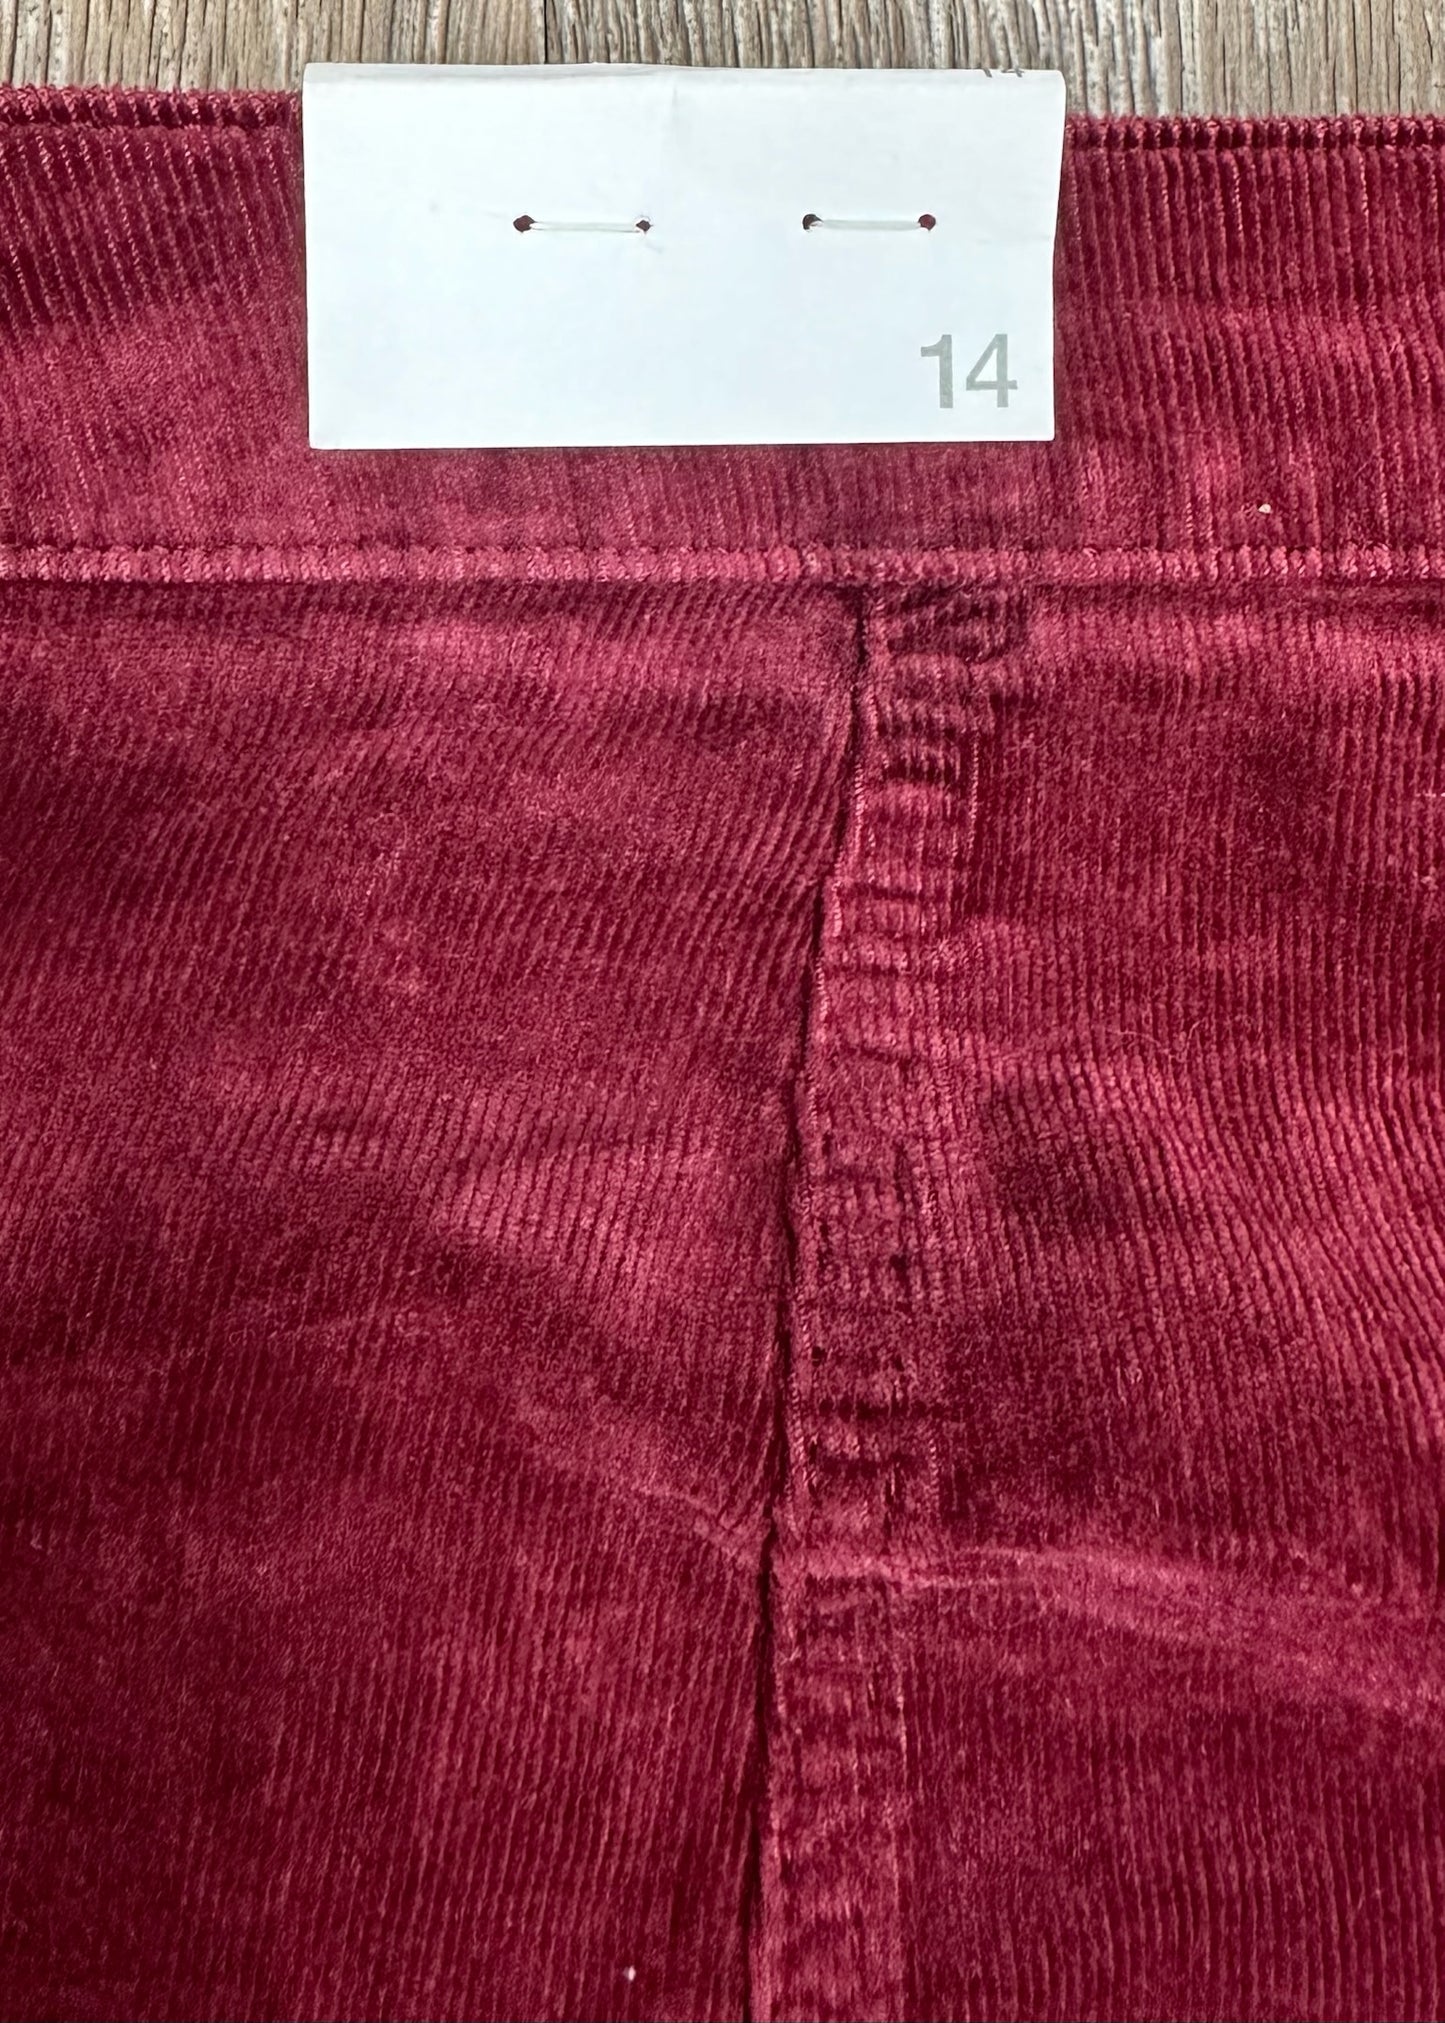 Burgundy Corduroy Skirt by Maurices